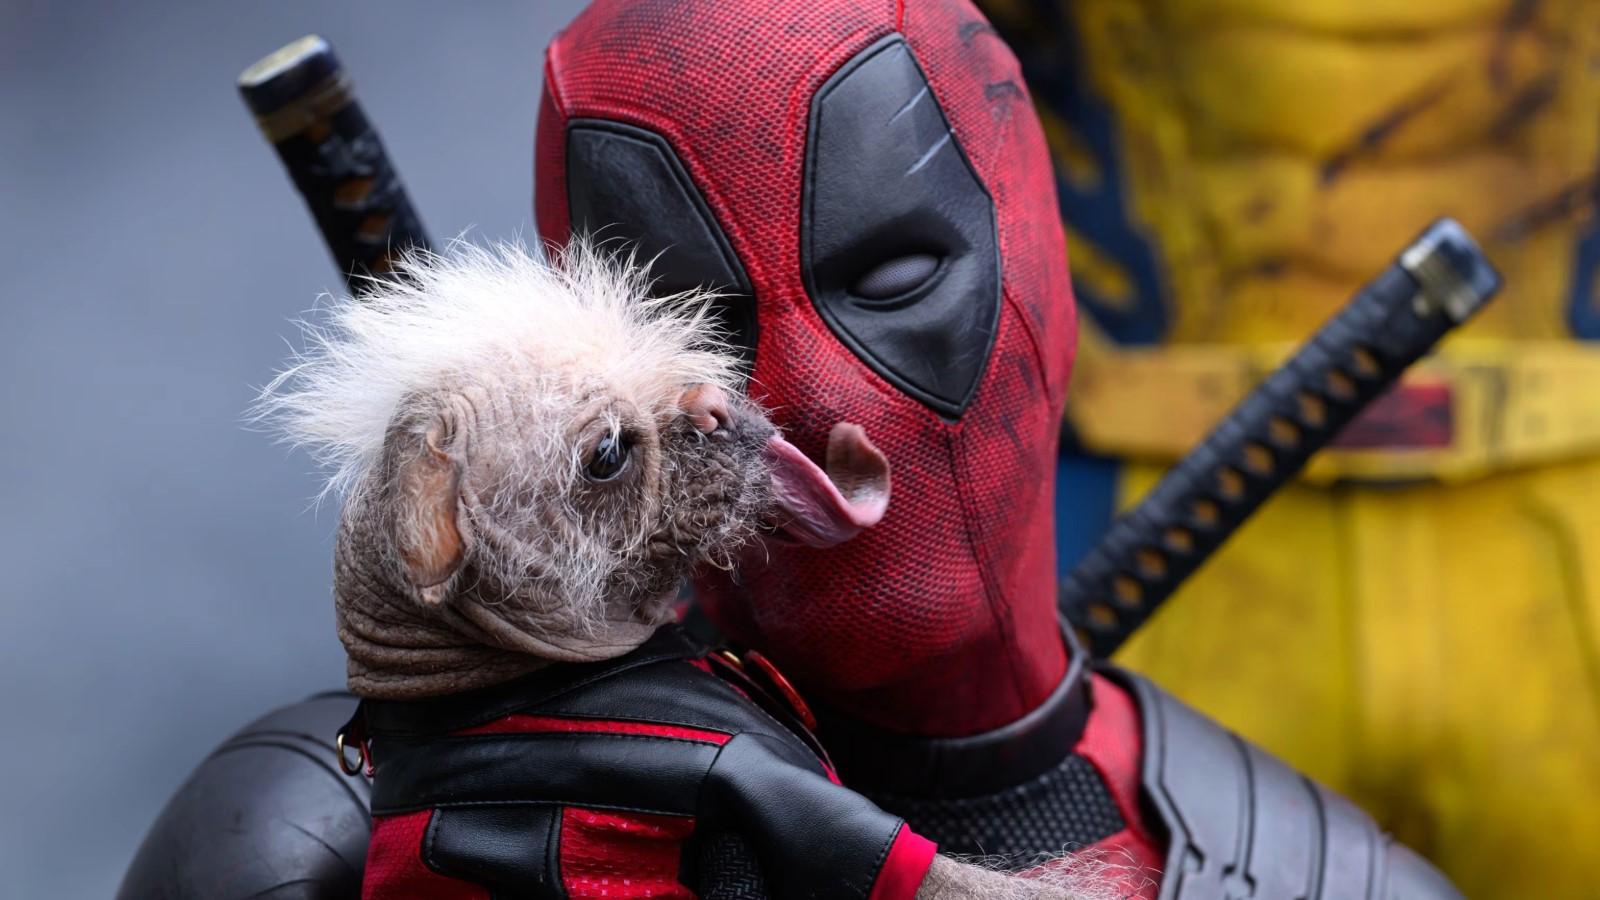 How to watch Deadpool & Wolverine: Ryan Reynolds as Deadpool, letting Dogpool lick his face